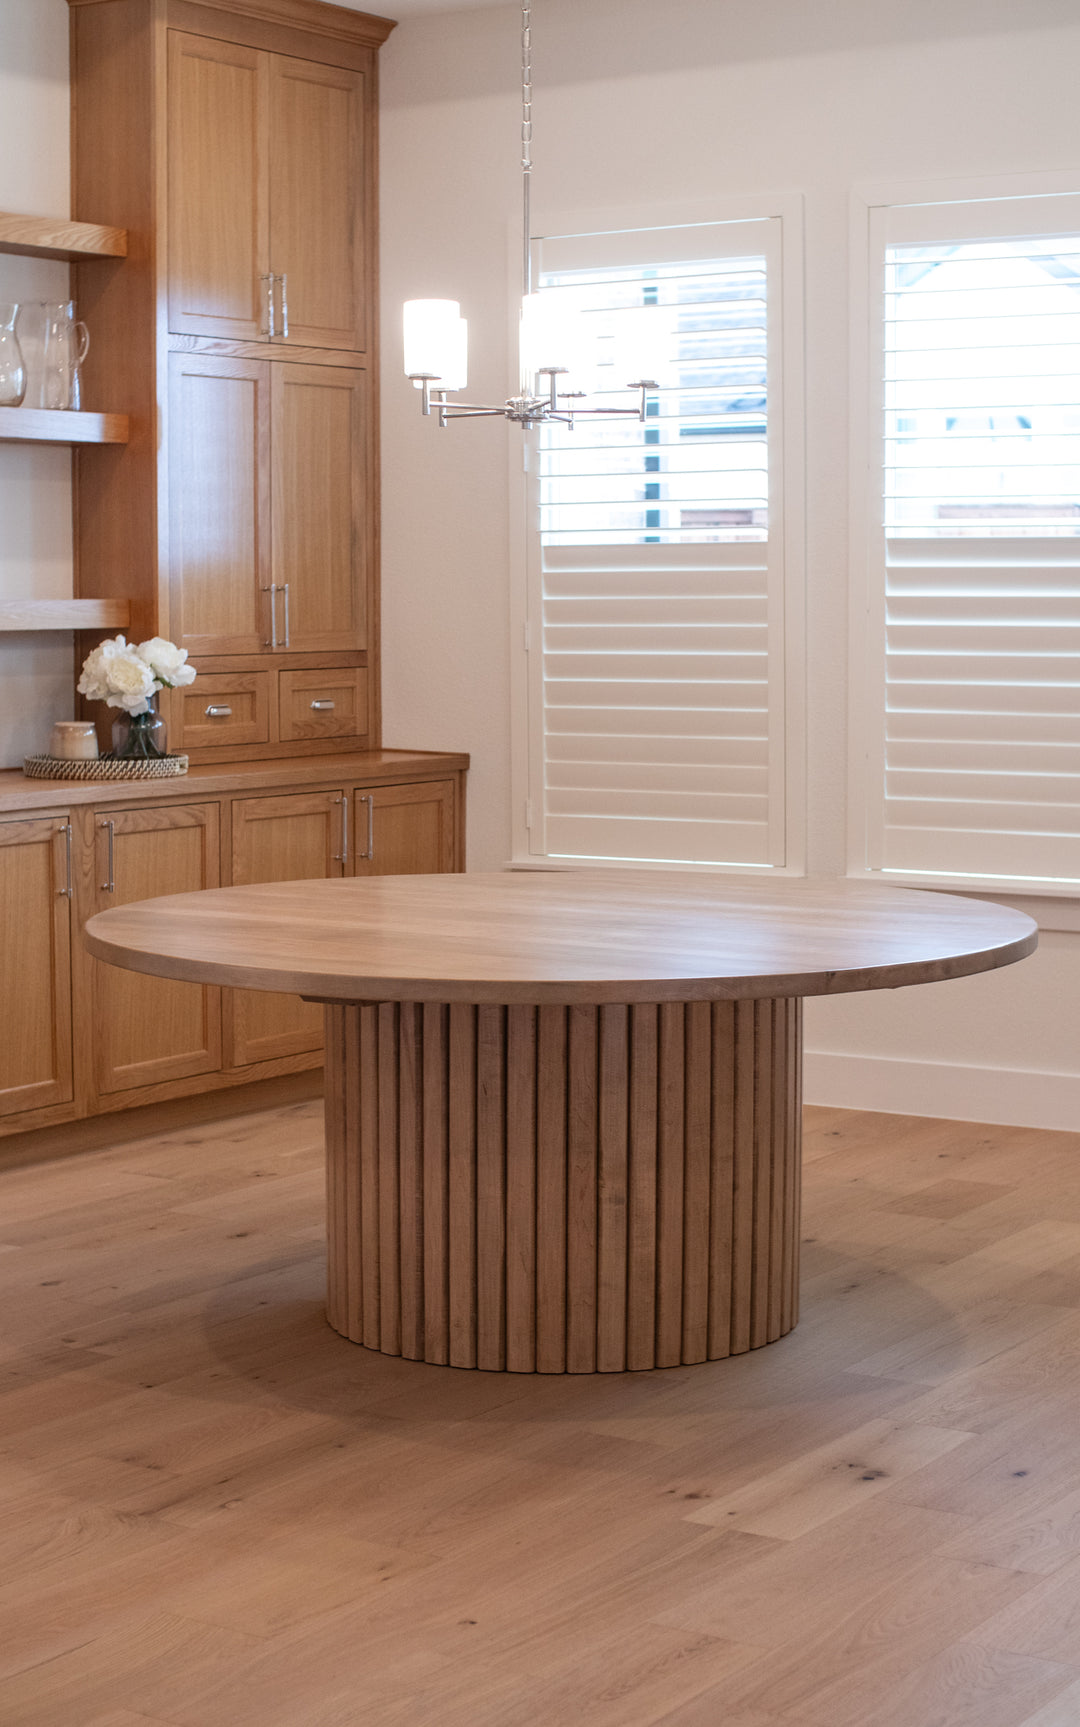 72" Reeded Round Dining Table